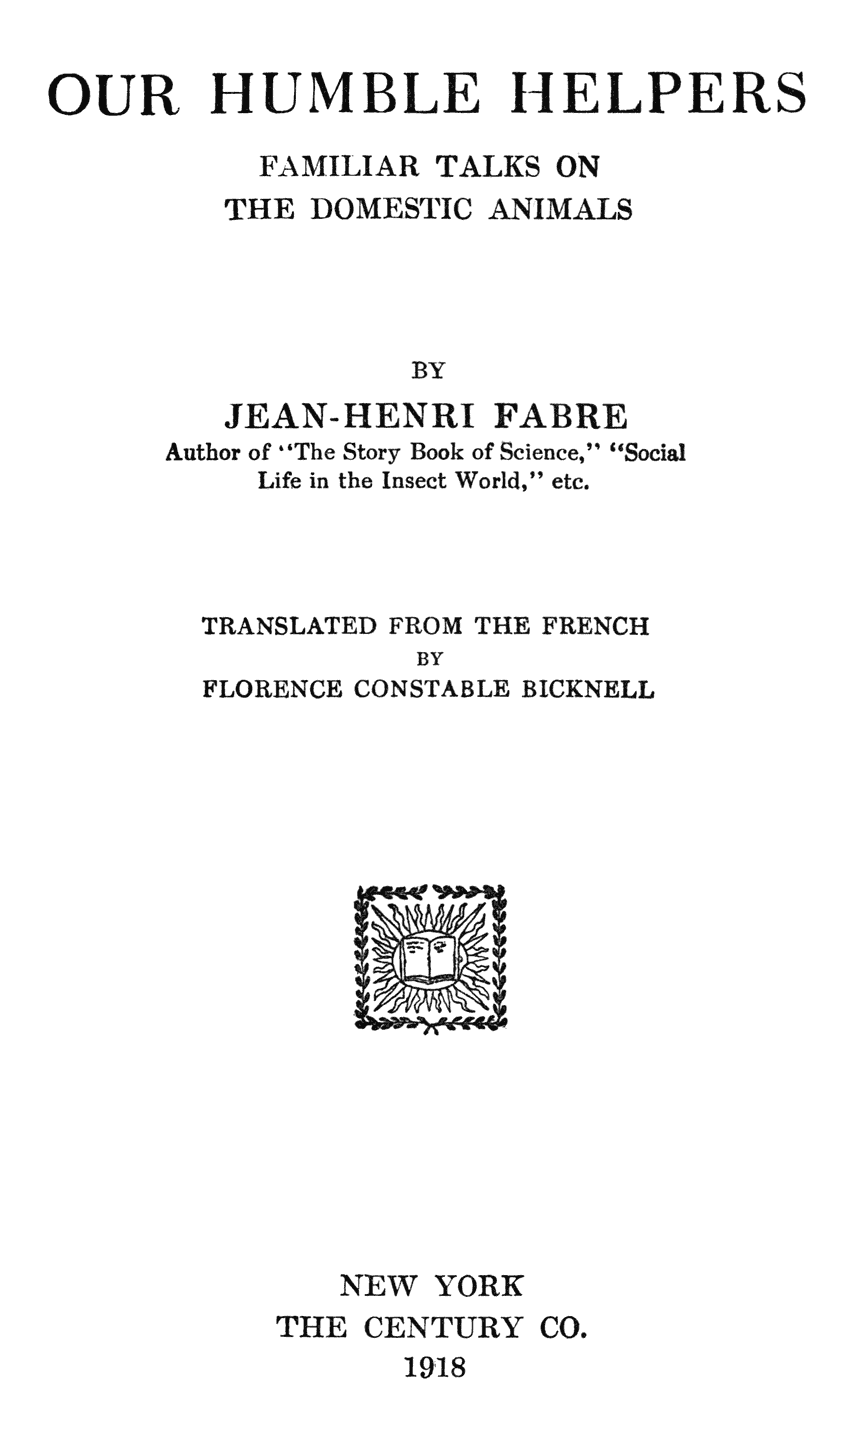 https://www.gutenberg.org/files/67073/67073-h/images/titlepage.png